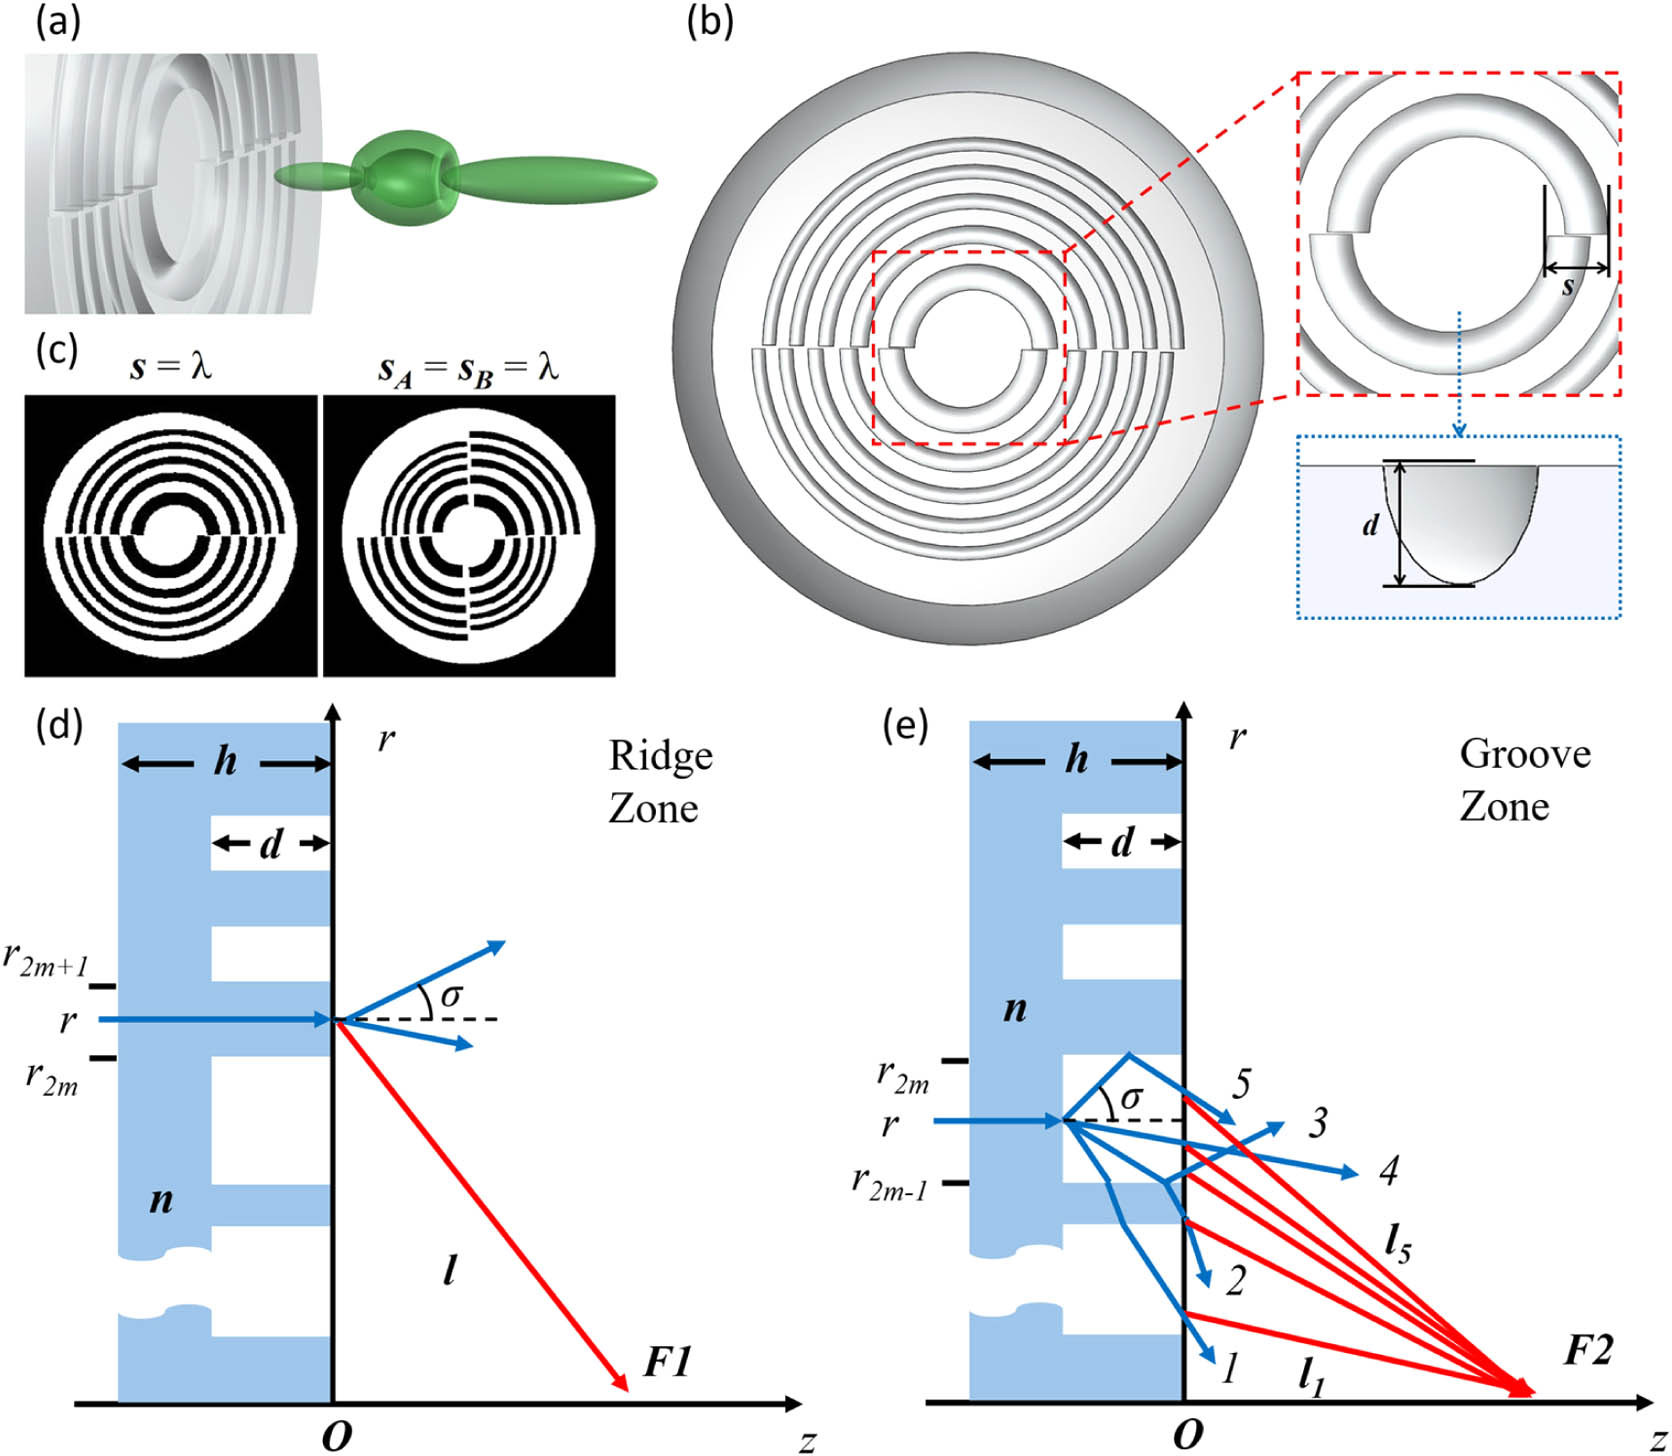 Conceptual design of engineered microsphere patterned with the segmented Fresnel annular zones. (a) 3D sketch of optical bottle beam (green) generated from the engineered microsphere. (b) Schematic sketch of the two-segment zone design engineered microsphere, s in the upper inset denotes the total relative dislocation of the opposite segments from the optical axis, while d in the lower inset is the etched depth of the annular zone with an elliptical cross section. (c) Refractive index maps show two embodiments of segmented regions (left: two-segment; right: four-segment), and all total relative dislocation distances are equal to λ. The light scattering by the piecewise interface of a phase FZP and related geometric parameters for (d) ridge zones and (e) groove zones. Sketches in (d) and (e) are not drawn to scale.